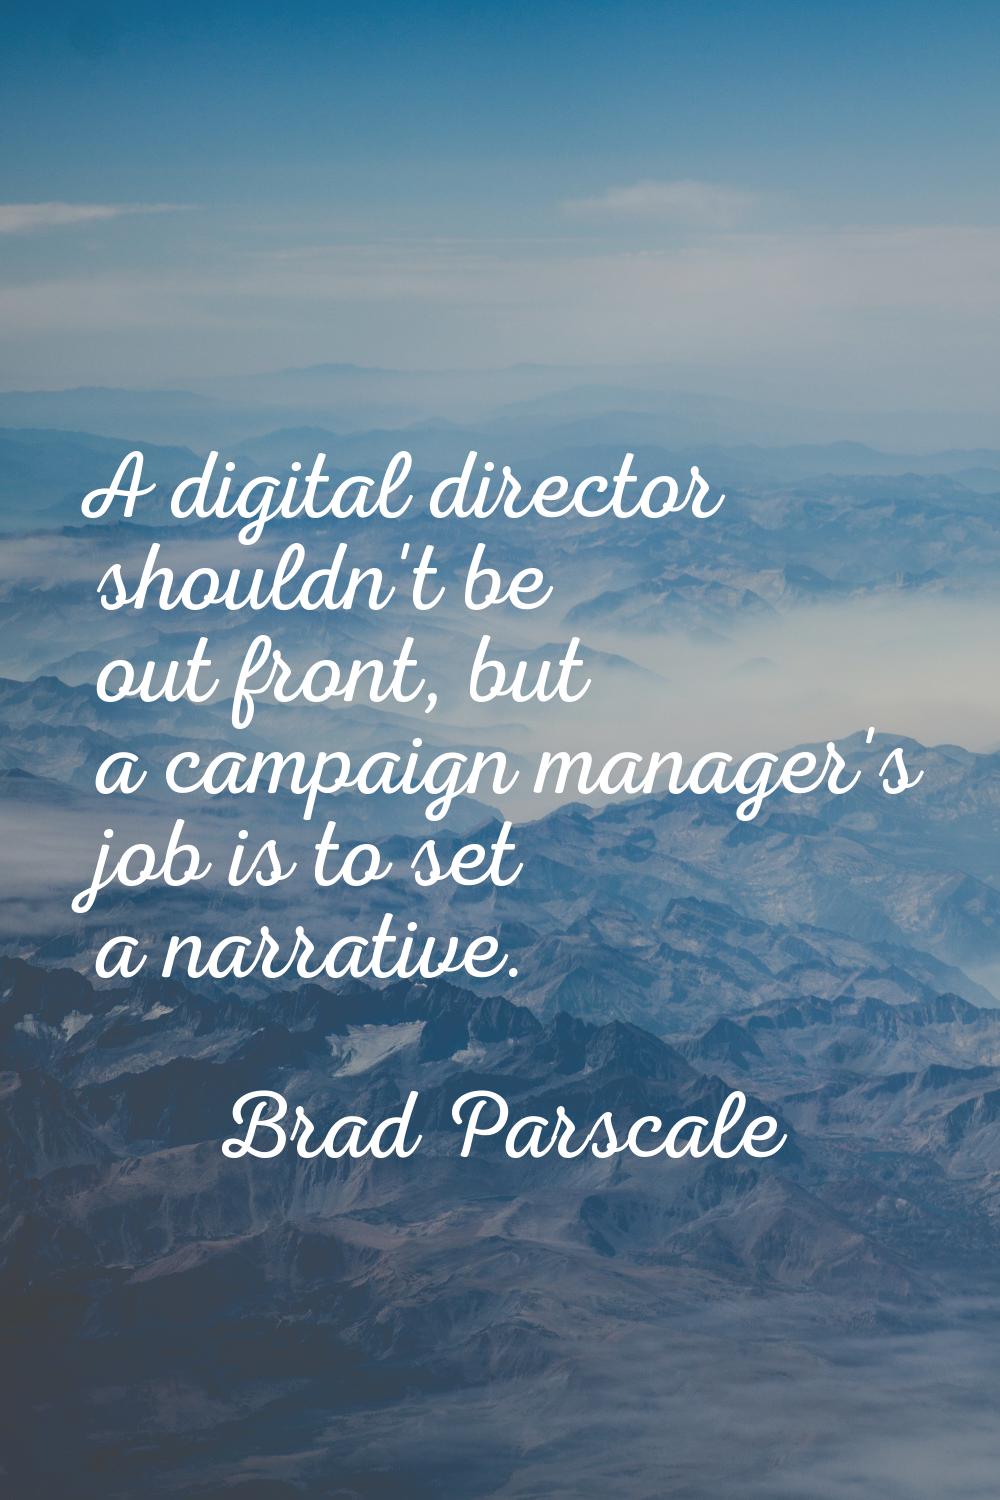 A digital director shouldn't be out front, but a campaign manager's job is to set a narrative.